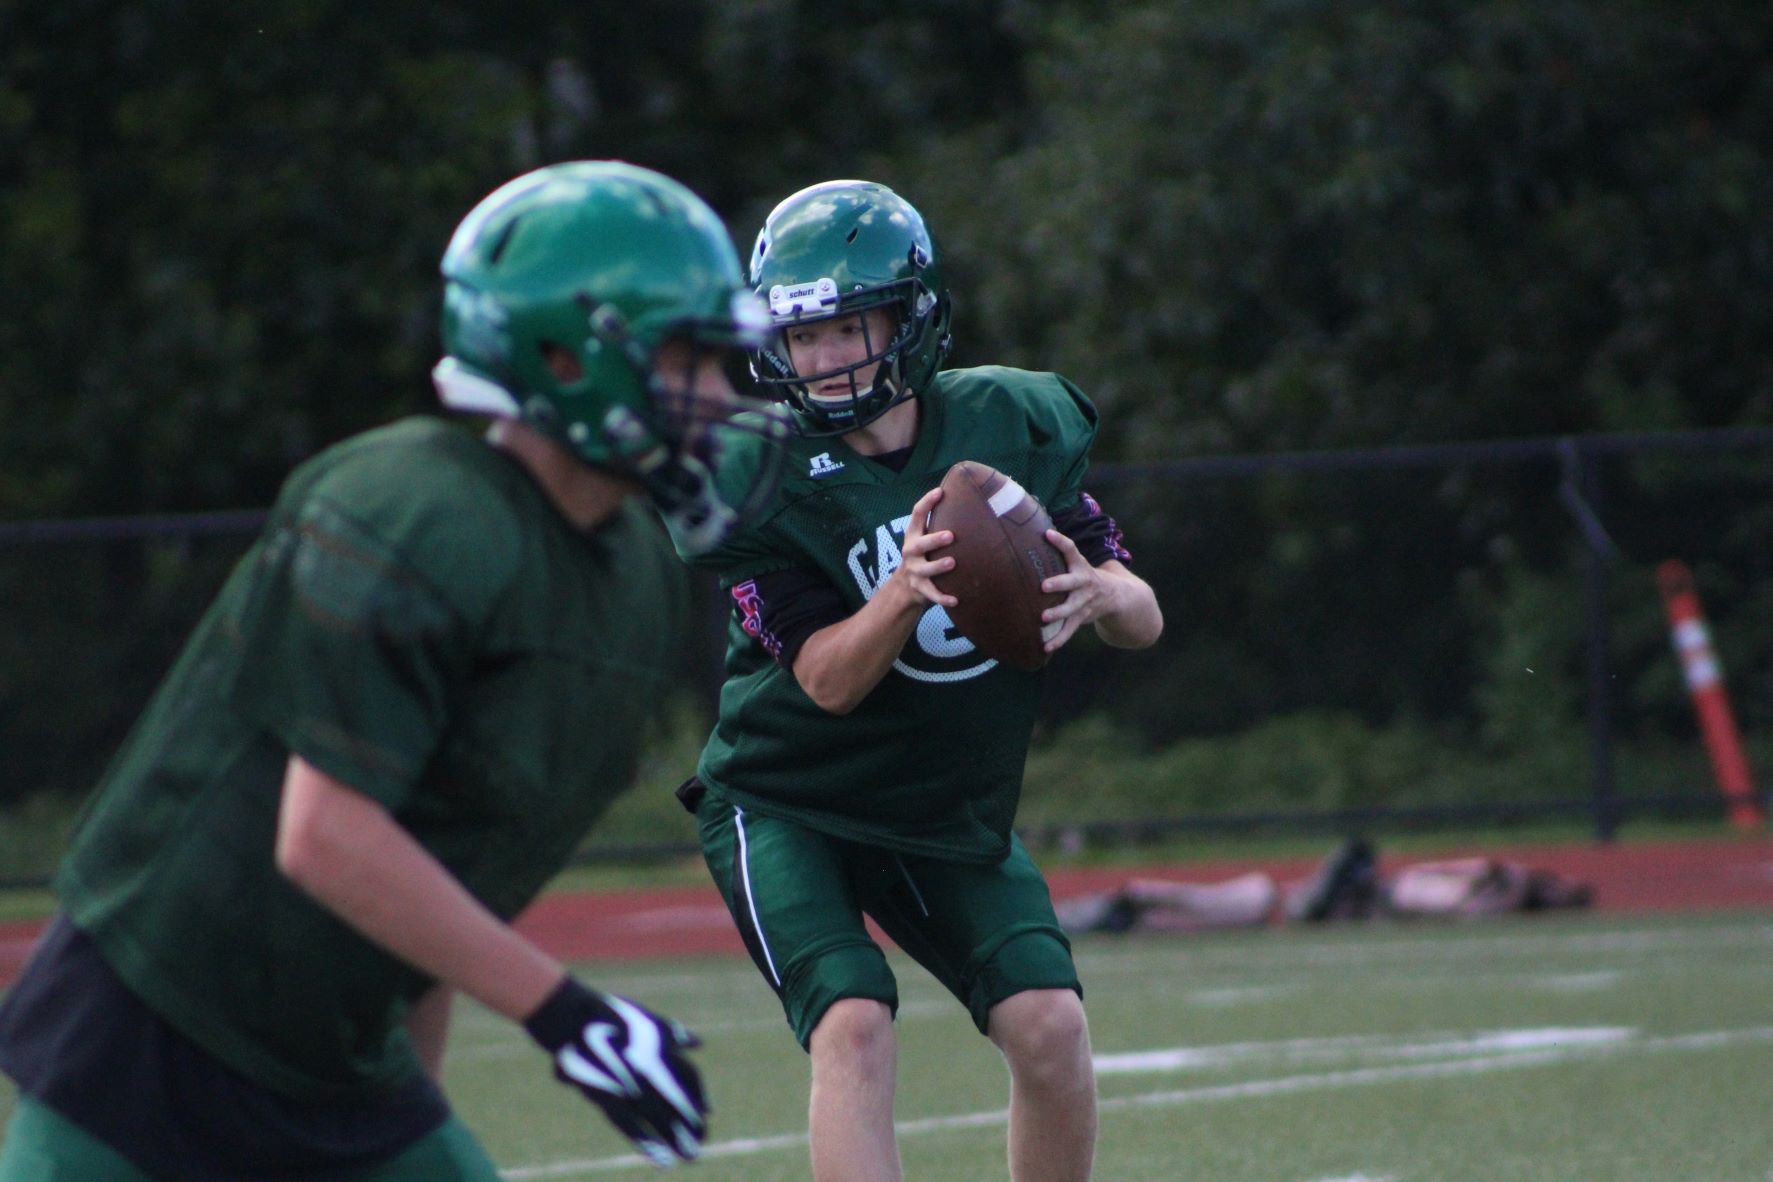 A Grafton quarterback looks before throwing the ball. (Photo/Laura Hayes)